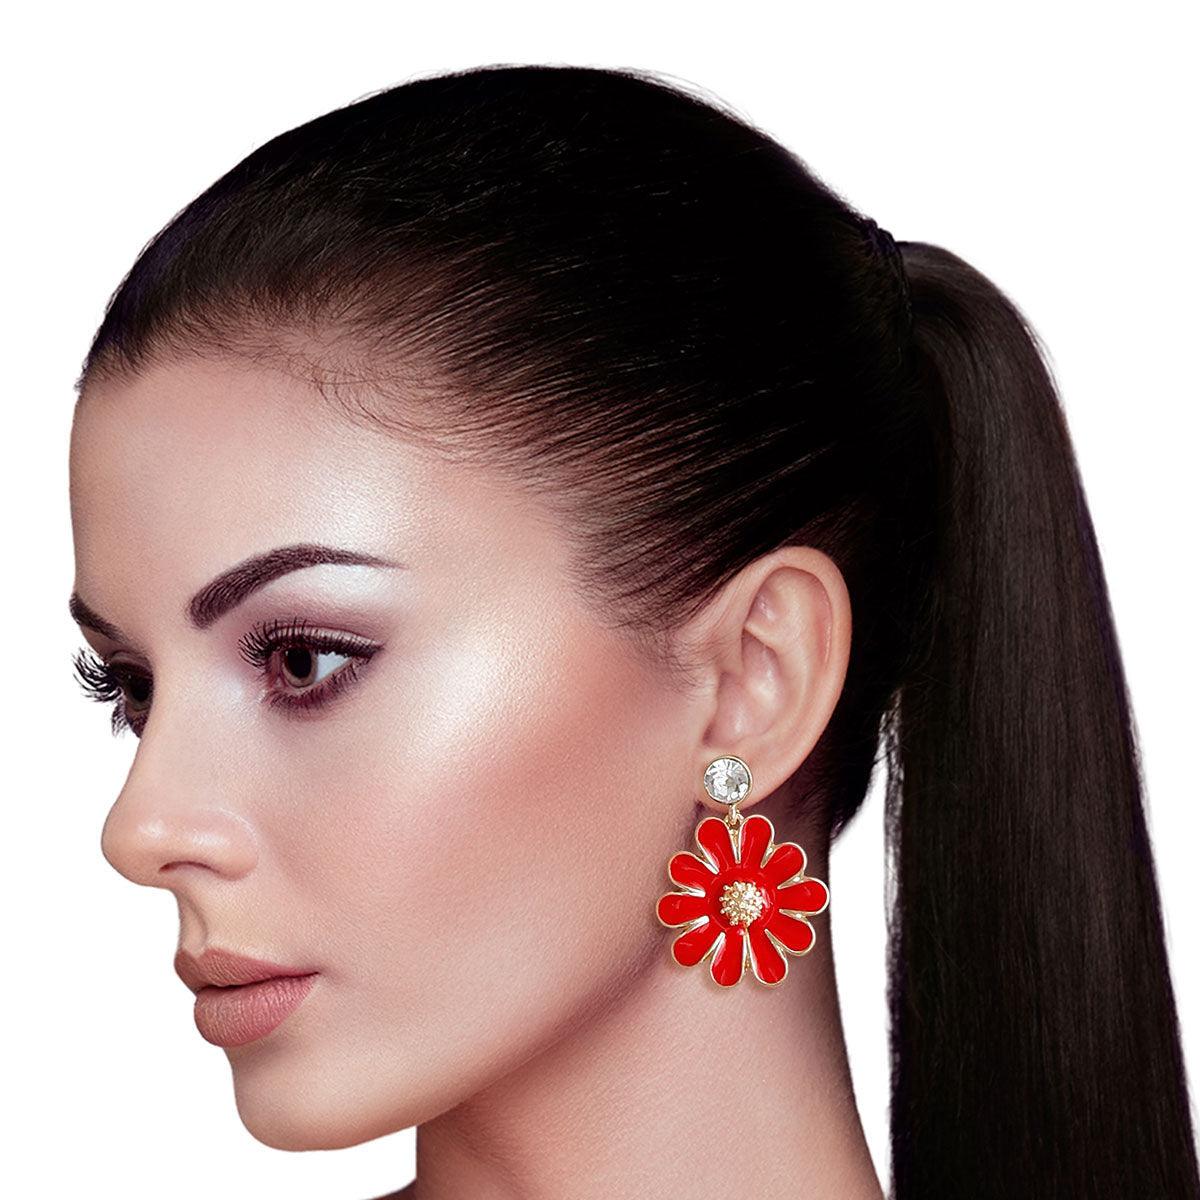 Get Groovy: Red Daisy Earrings for a Sweet Mod Style!